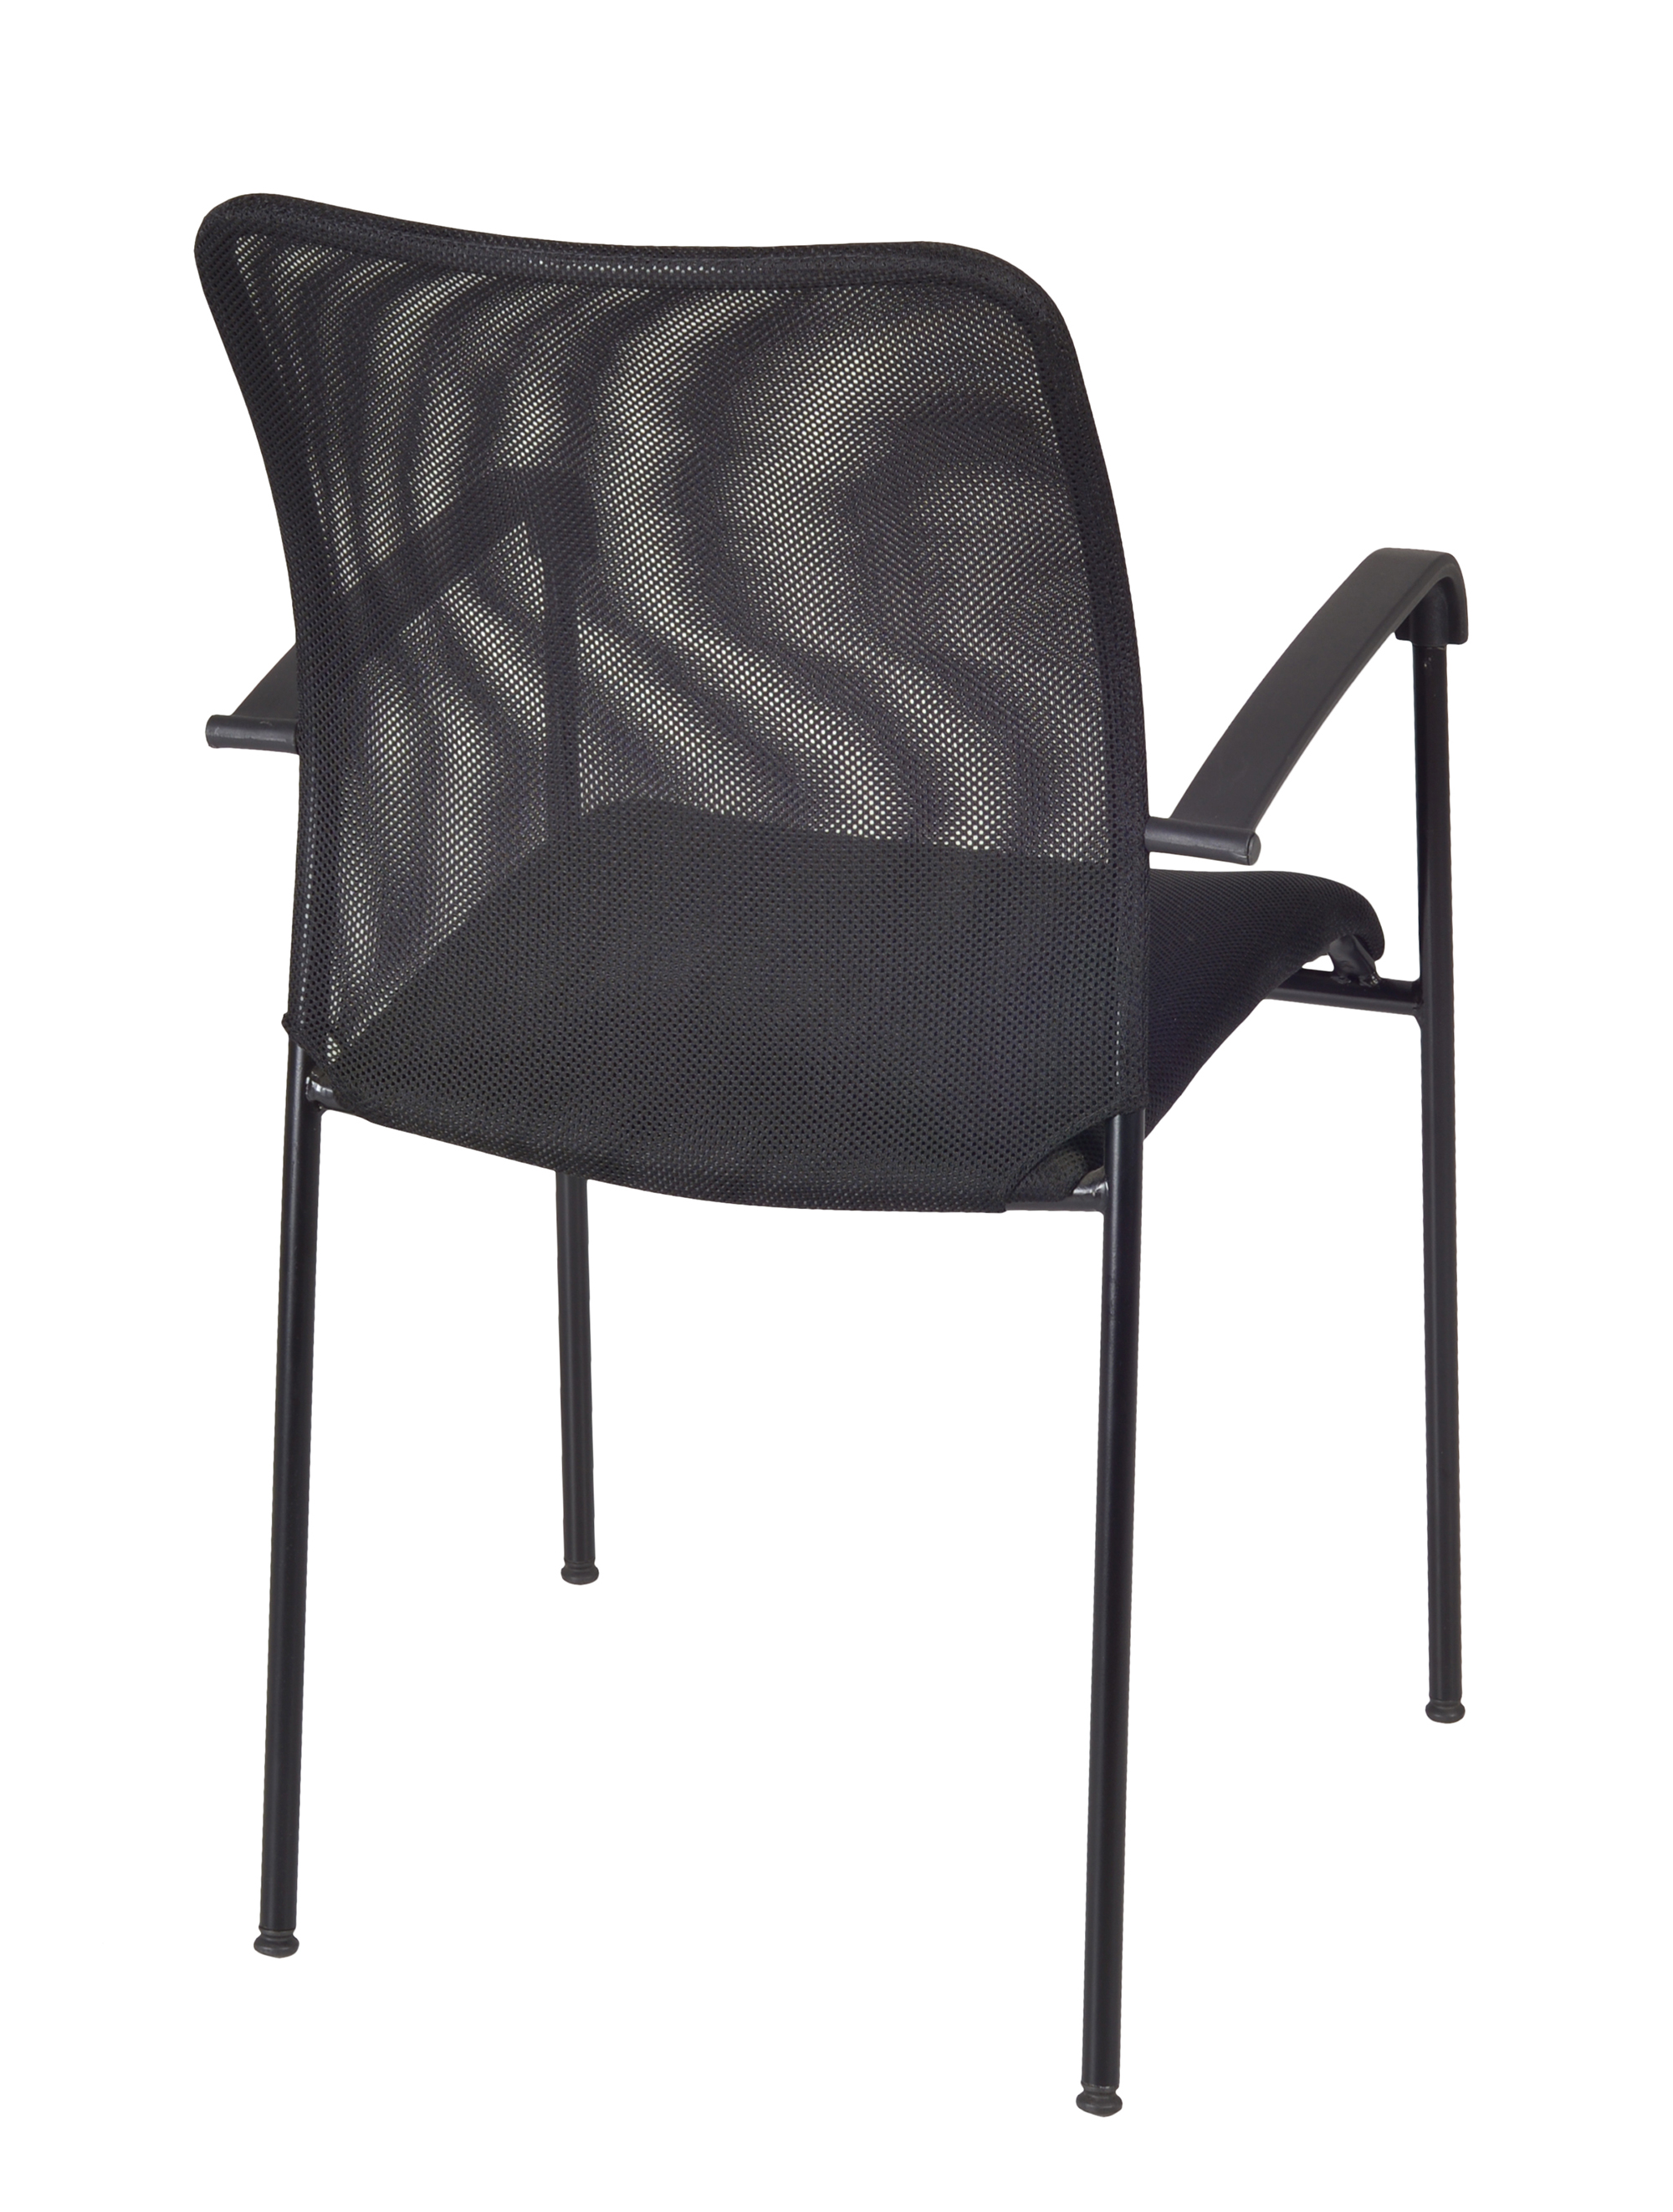 Mario Stack Chair (24 pack)- Black - image 4 of 4